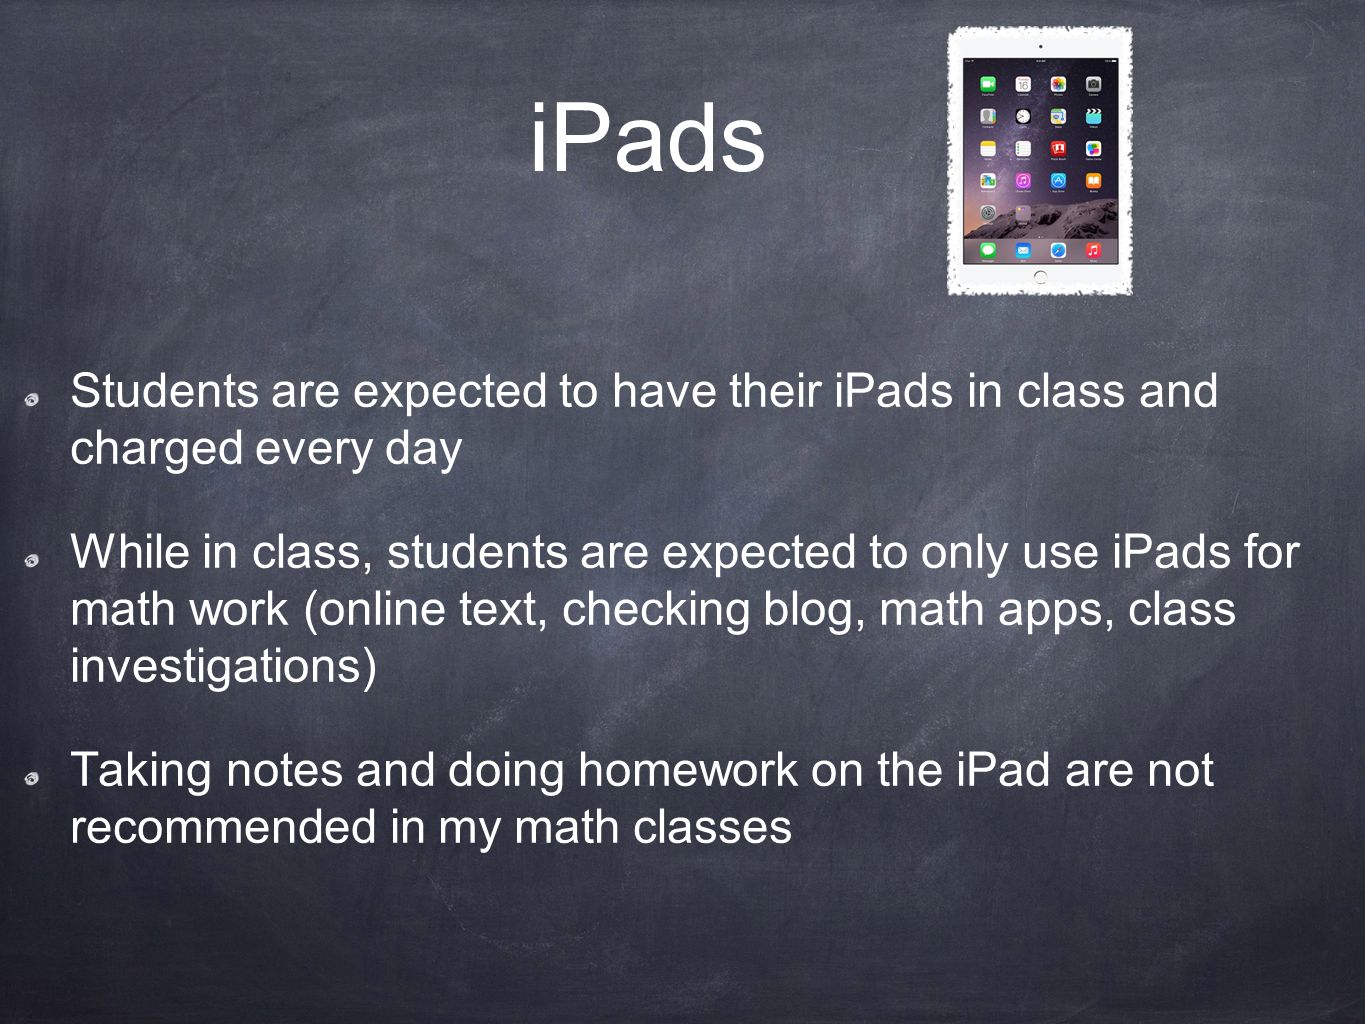 iPads Students are expected to have their iPads in class and charged every day While in class, students are expected to only use iPads for math work (online text, checking blog, math apps, class investigations) Taking notes and doing homework on the iPad are not recommended in my math classes